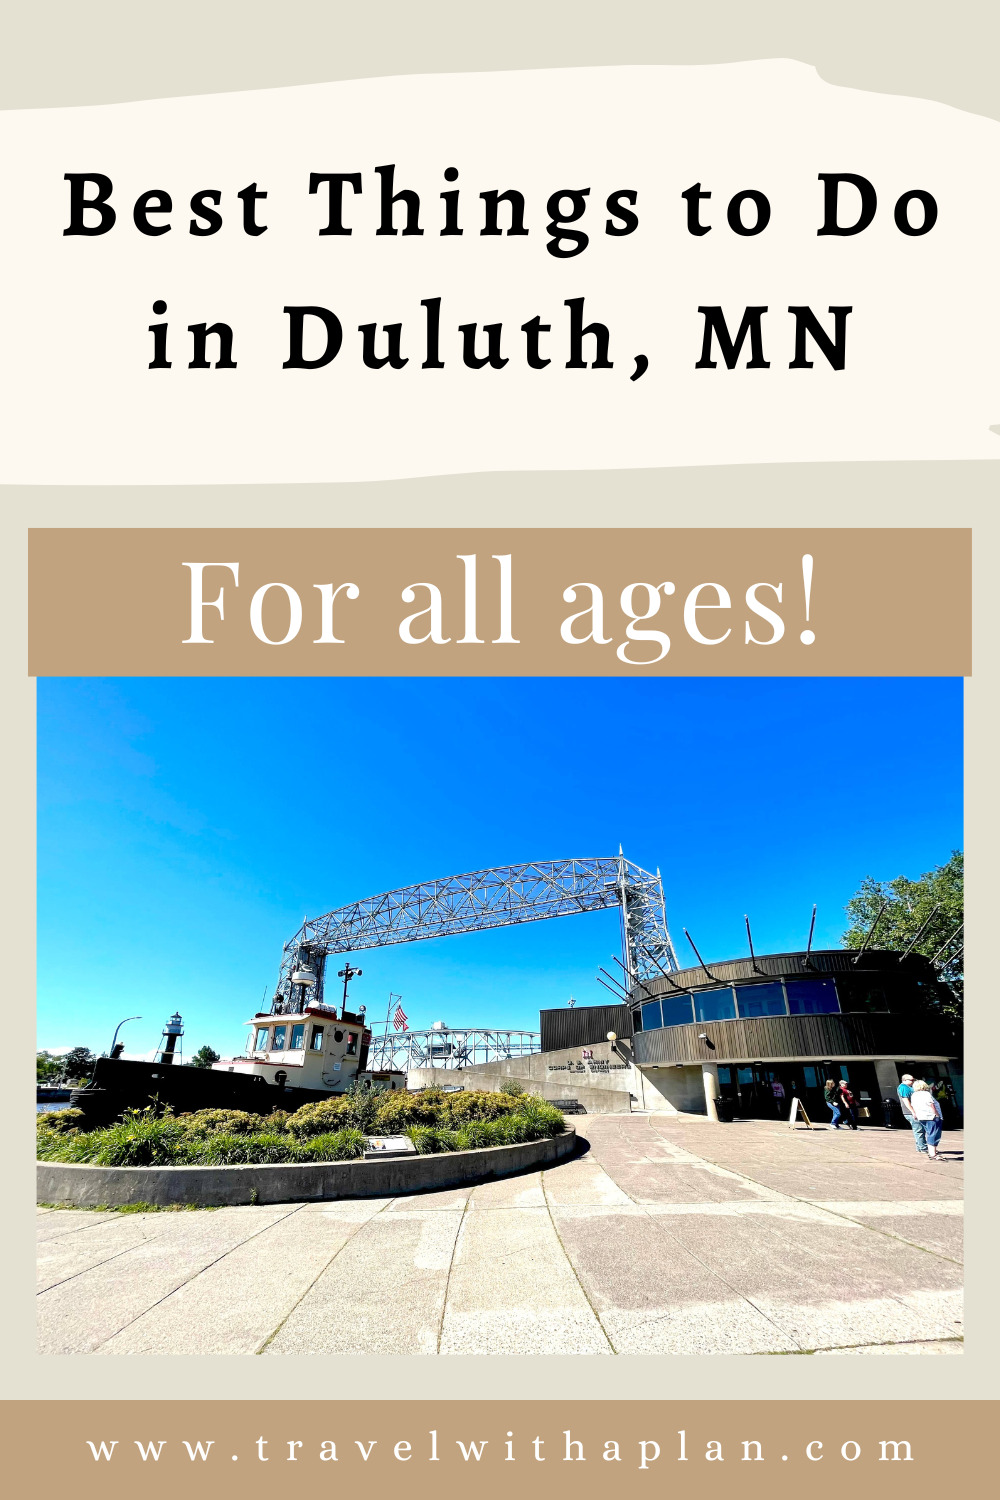 Check out these top Duluth attractions from US family travel blog, Travel With A Plan!  #bestthingstodoinDuluth #DuluthMN #Minnesotavacation